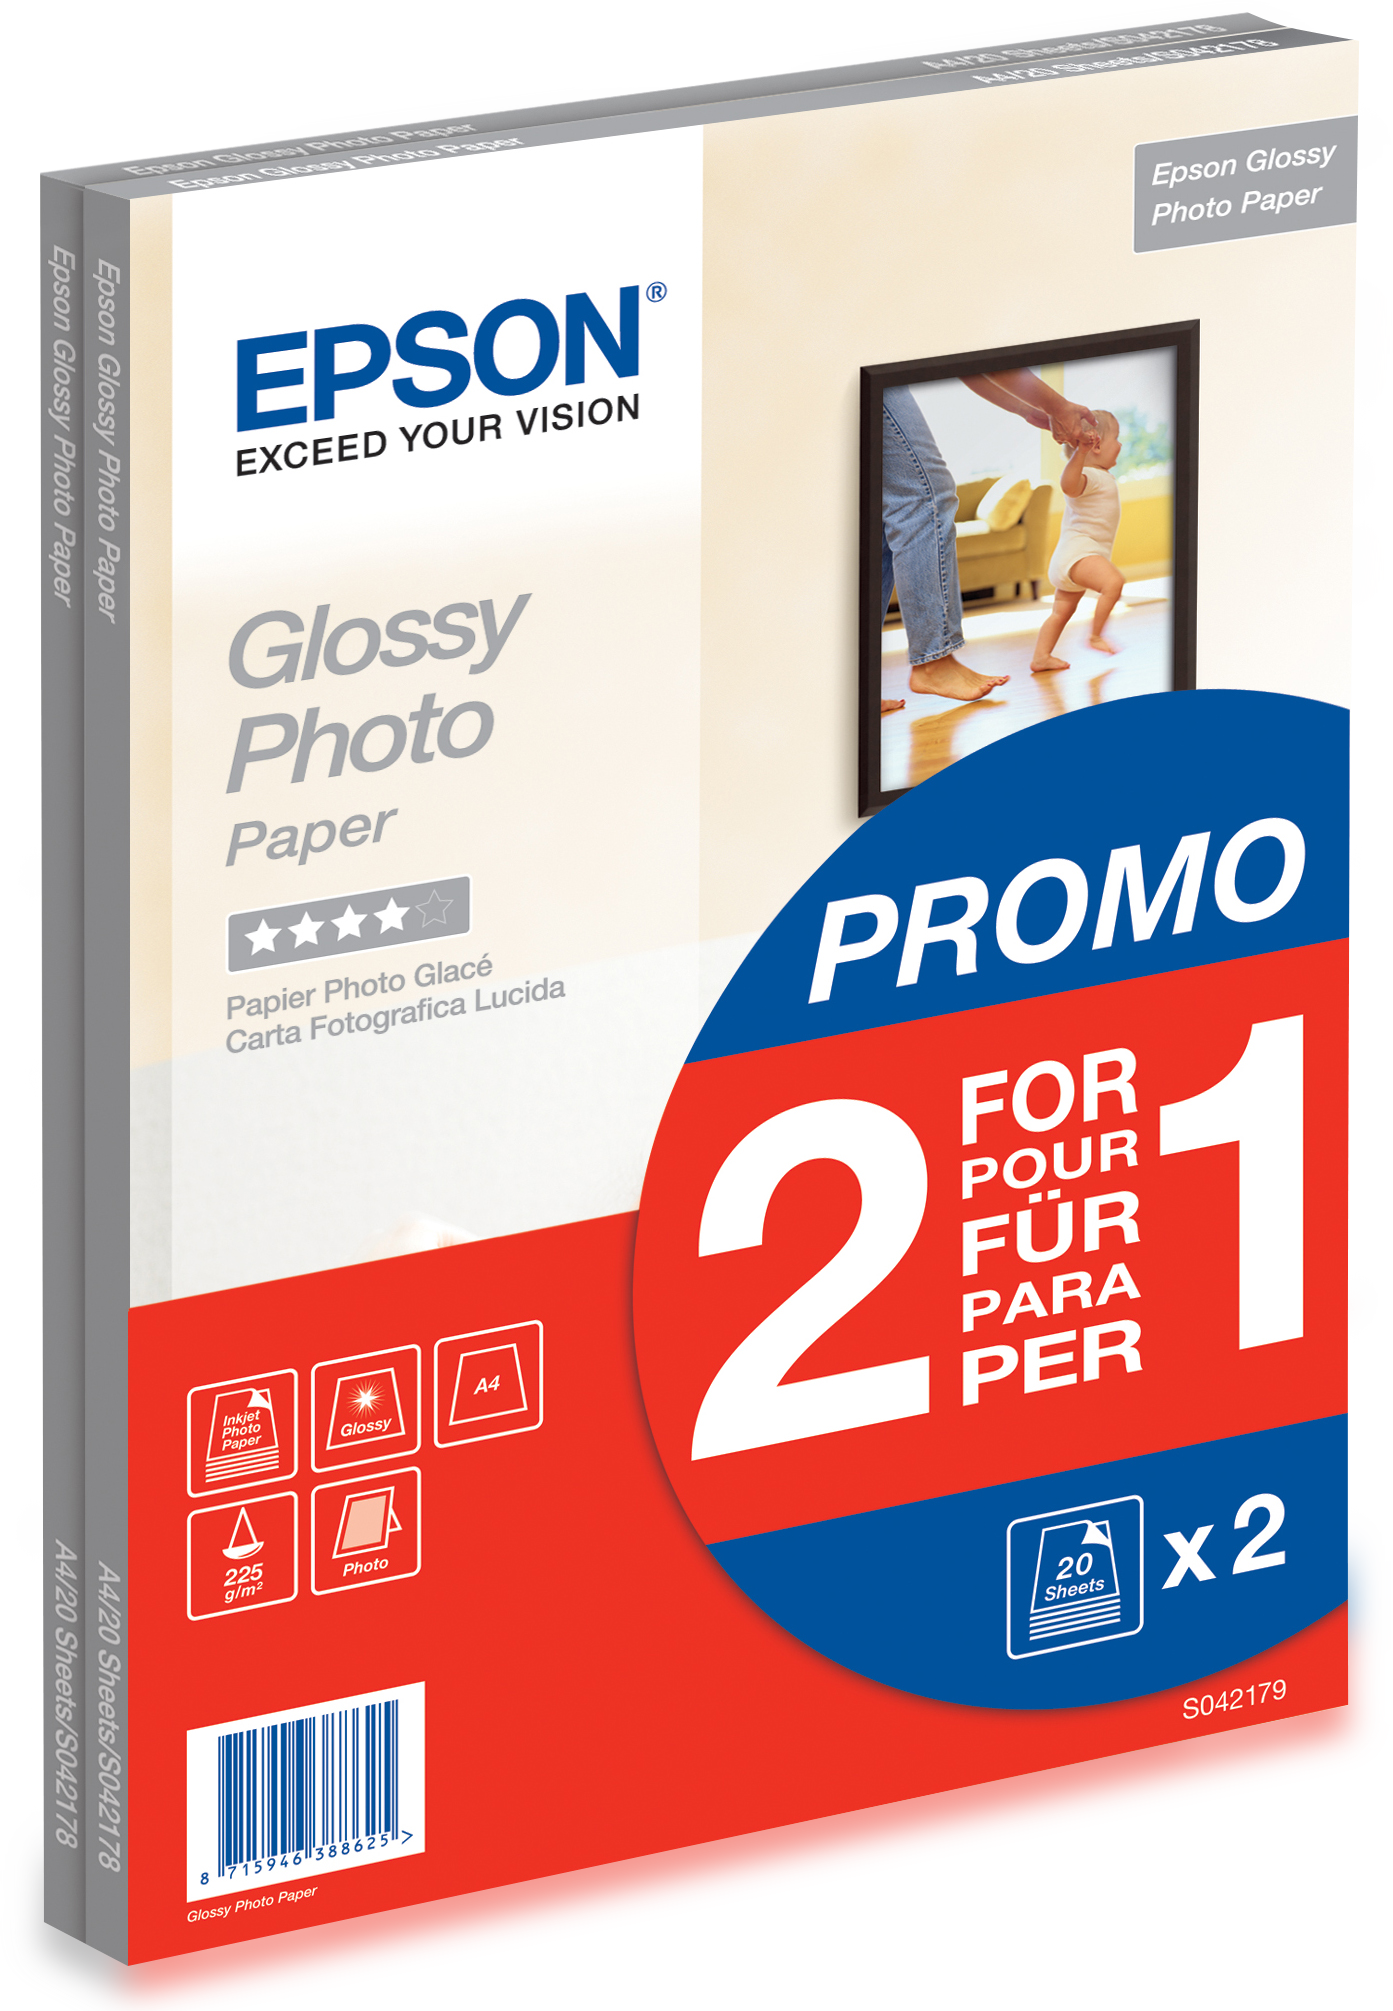 CARTUCCE INKJET BREVETTATE G&G PER EPSON EXPRESSION HOME XP-2200 